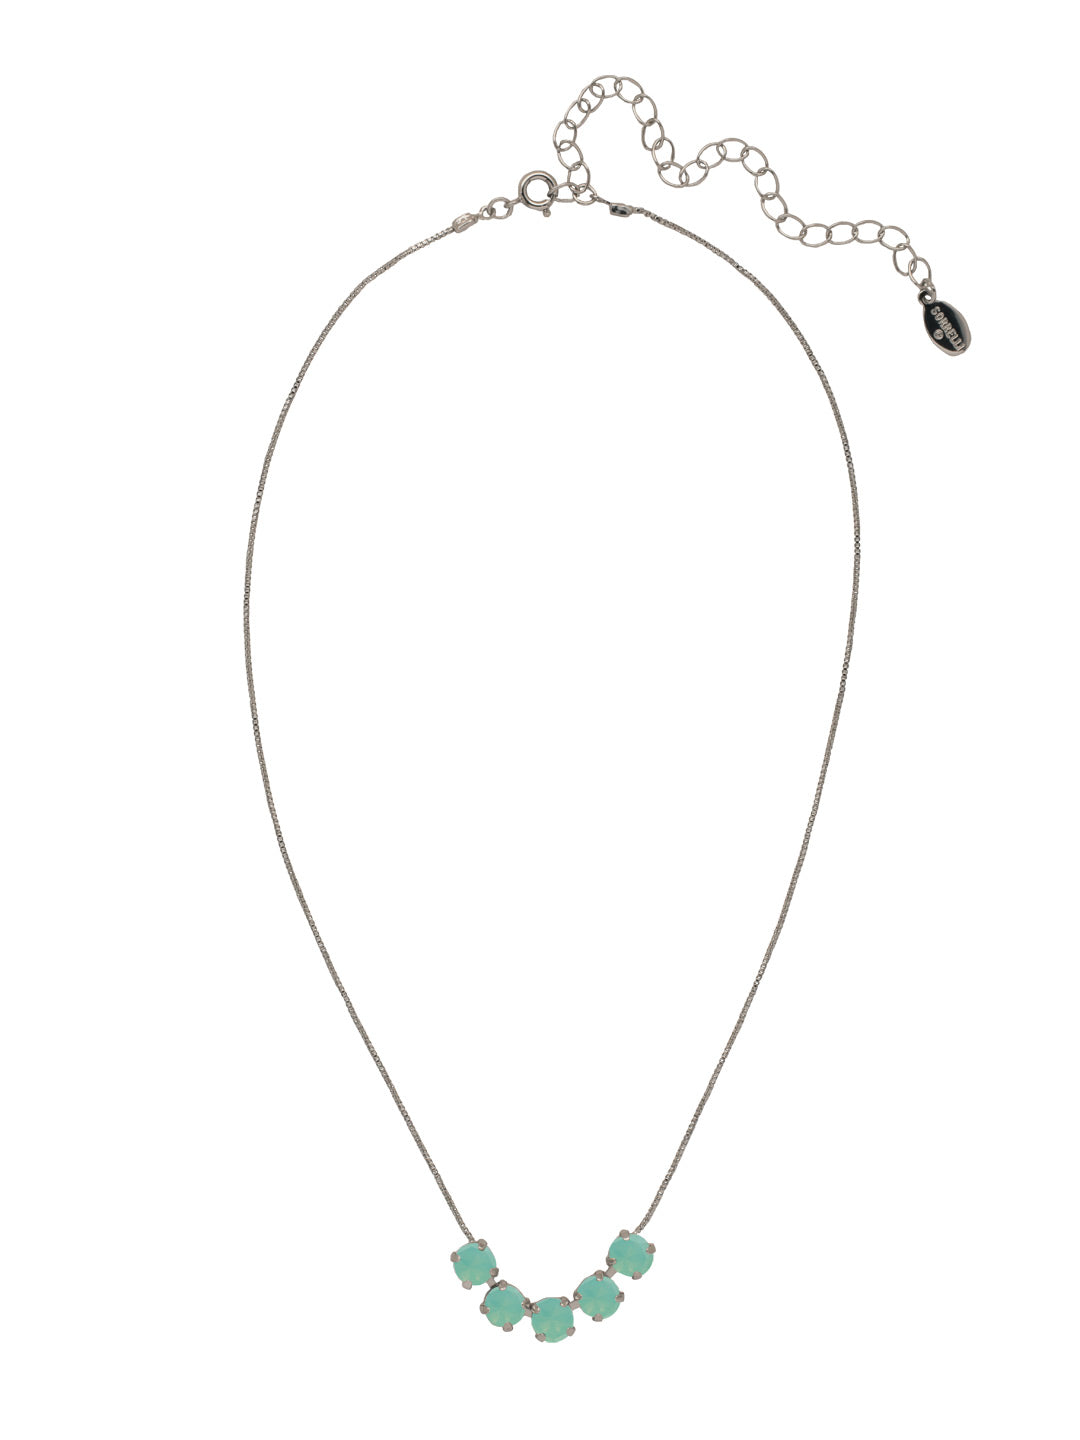 Shaughna Tennis Necklace - NFC84ASPAC - <p>The Shaughna Tennis Necklace features five crystals on a delicate adjustable chain. From Sorrelli's Pacific Opal collection in our Antique Silver-tone finish.</p>